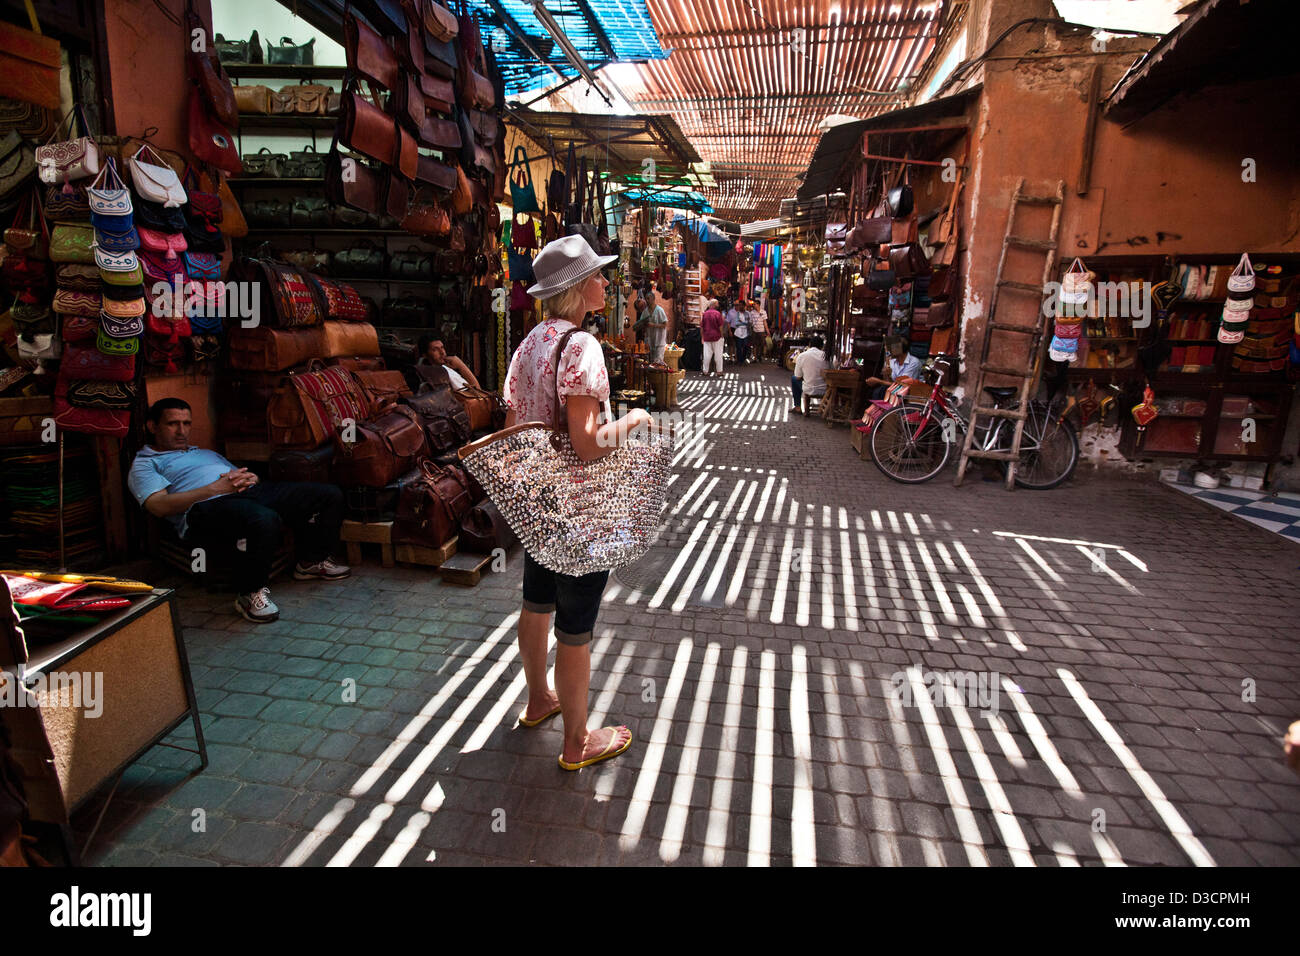 Young woman shopping in Souk, Marrakech, Maroc Banque D'Images